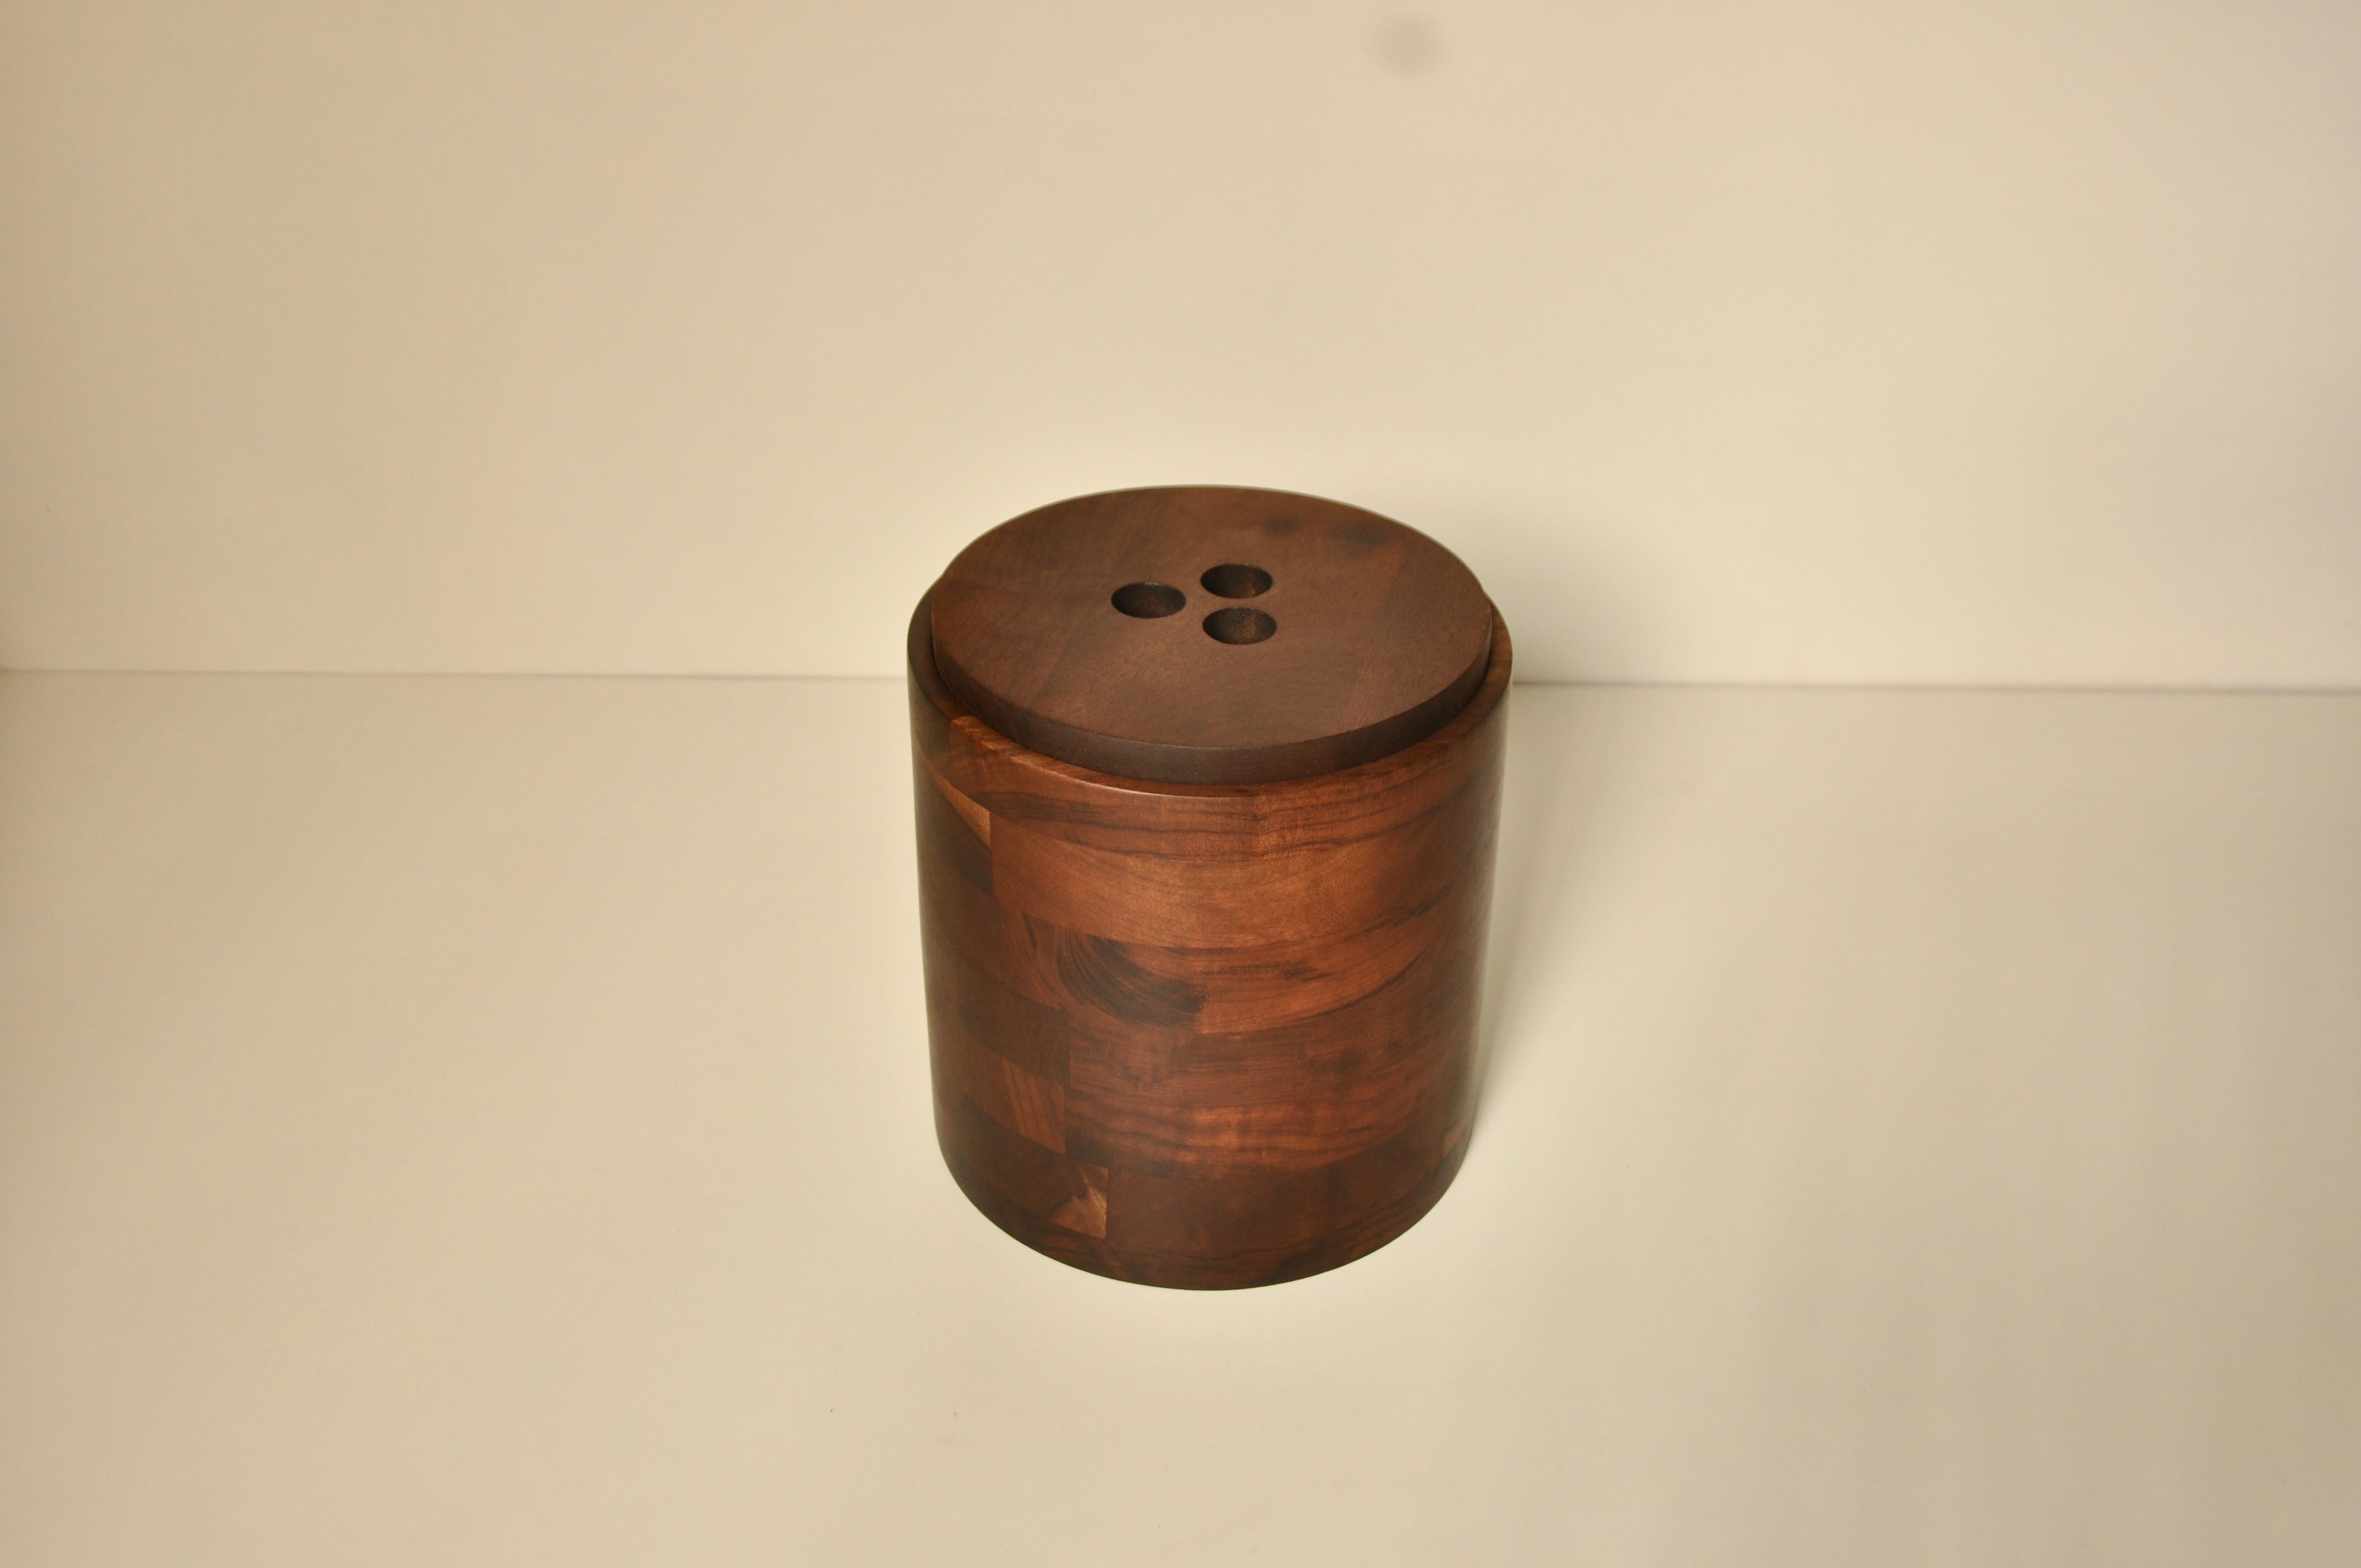 Brazilian mid-century wooden ice bucket in solid pieces of imbuia wood, designed by Jean Dobré for Tropic-Art. This piece preserve the manufacturer's seal.

Tropic-Art manufactured in the middle of the last century on a large scale utilitarian